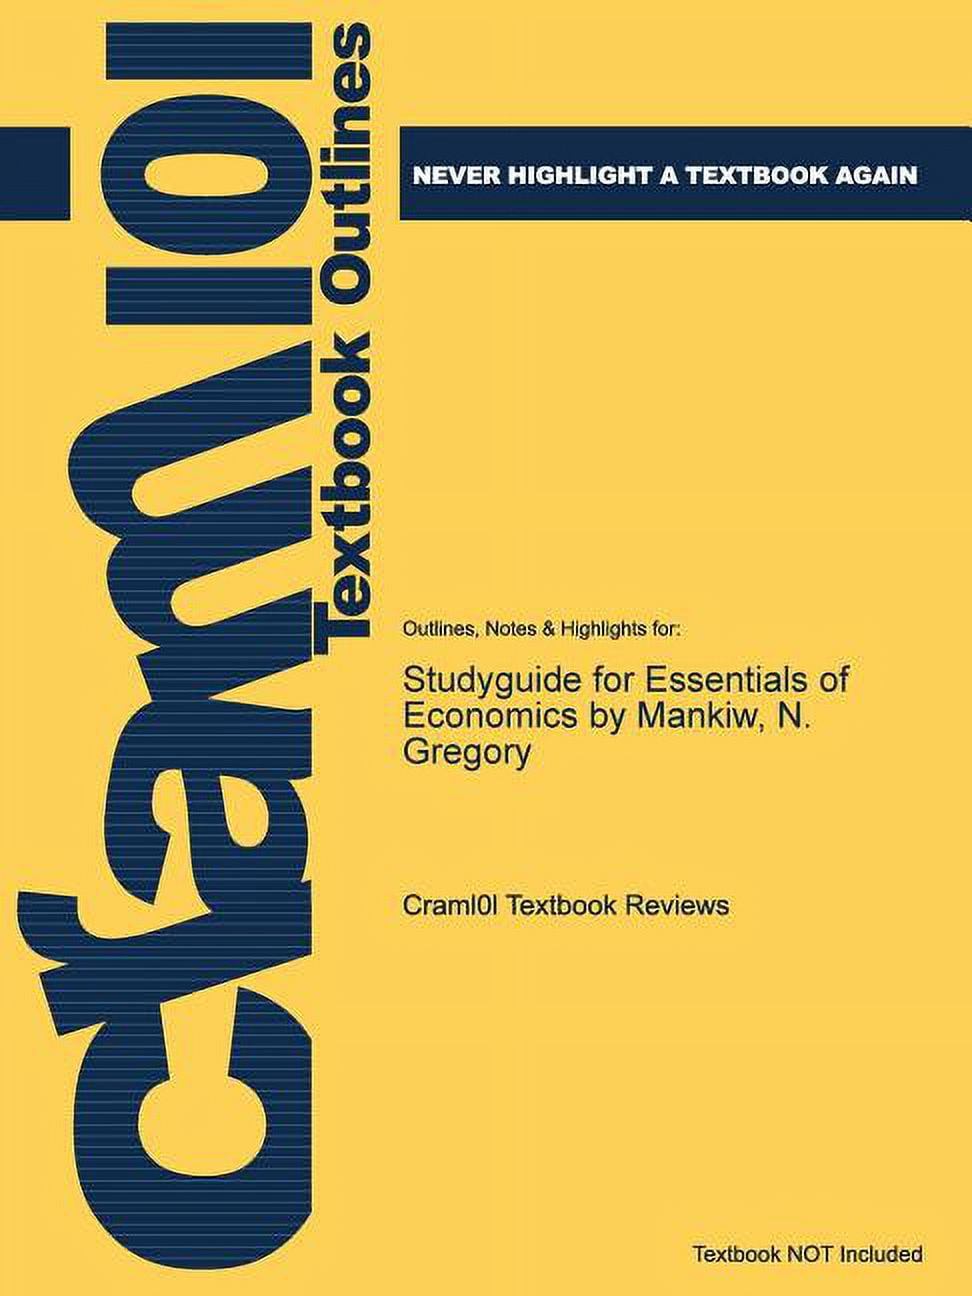 Mankiw,　of　Studyguide　(Paperback)　for　Economics　Essentials　by　N.　Gregory